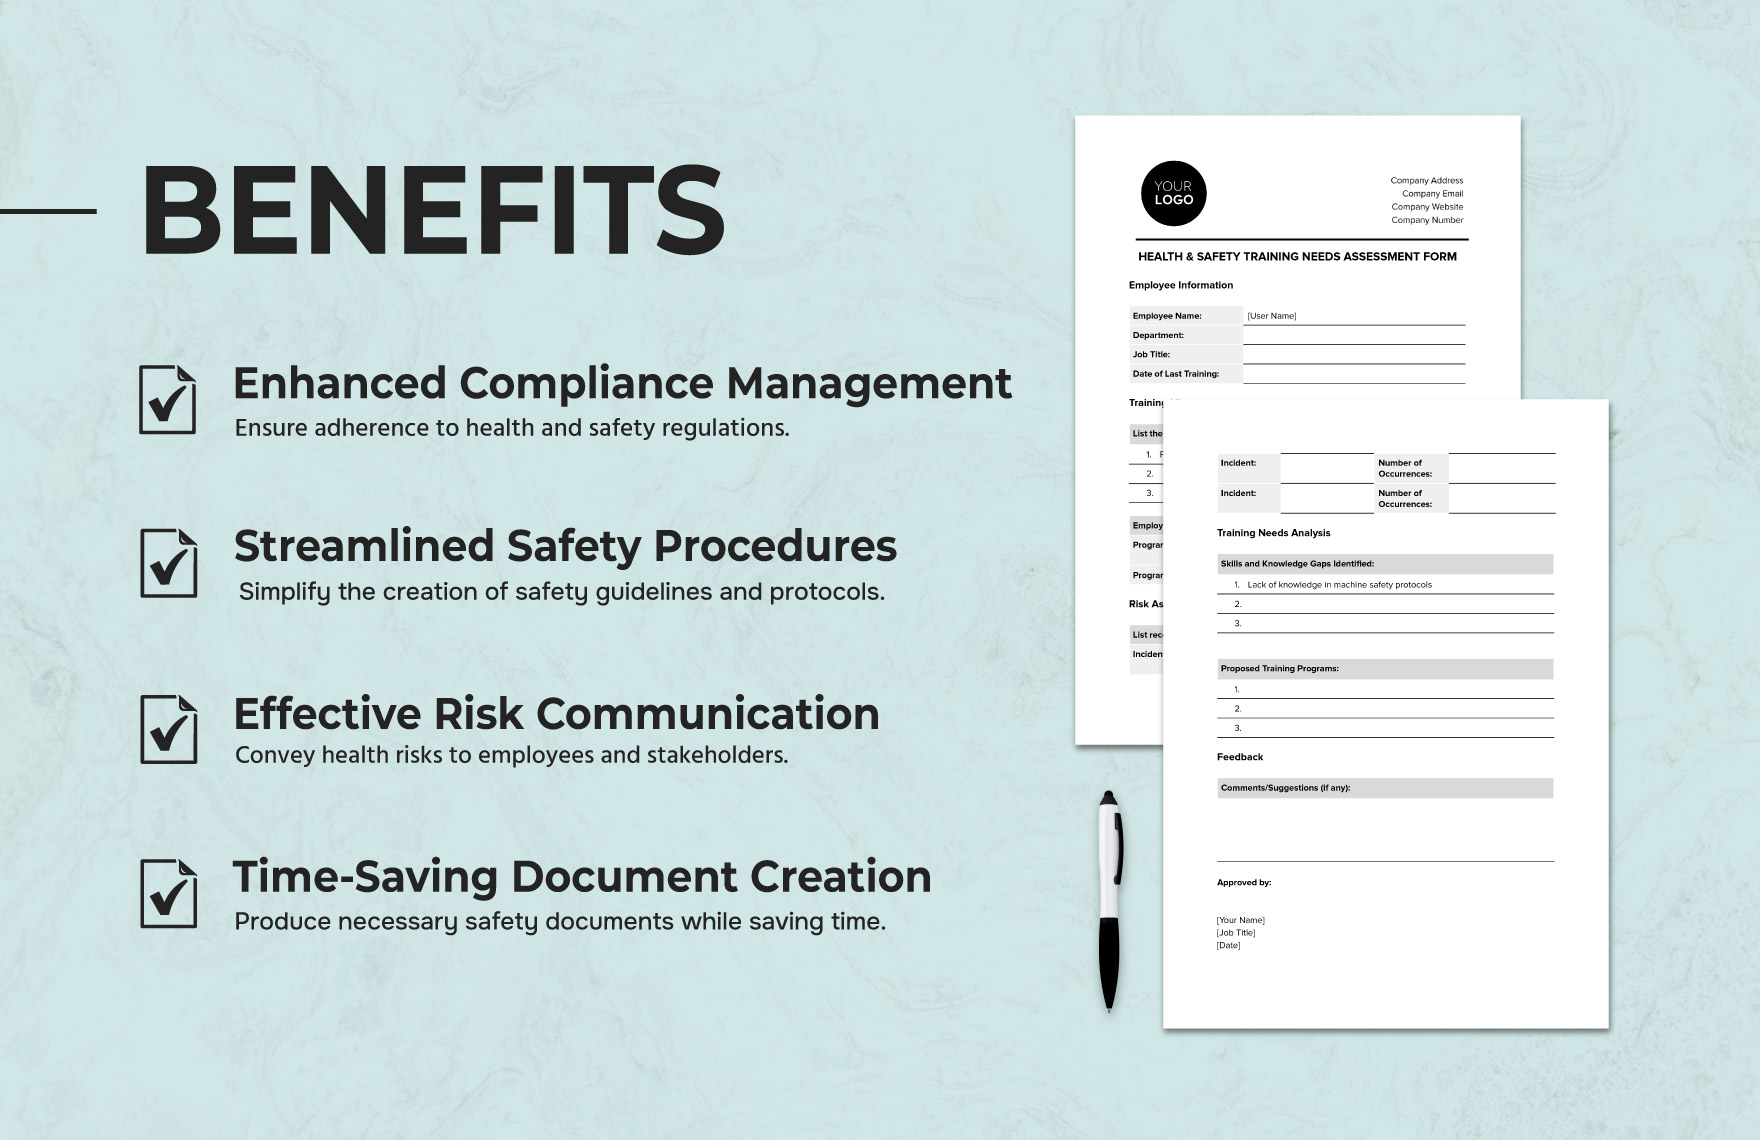 Health & Safety Training Needs Assessment Form Template